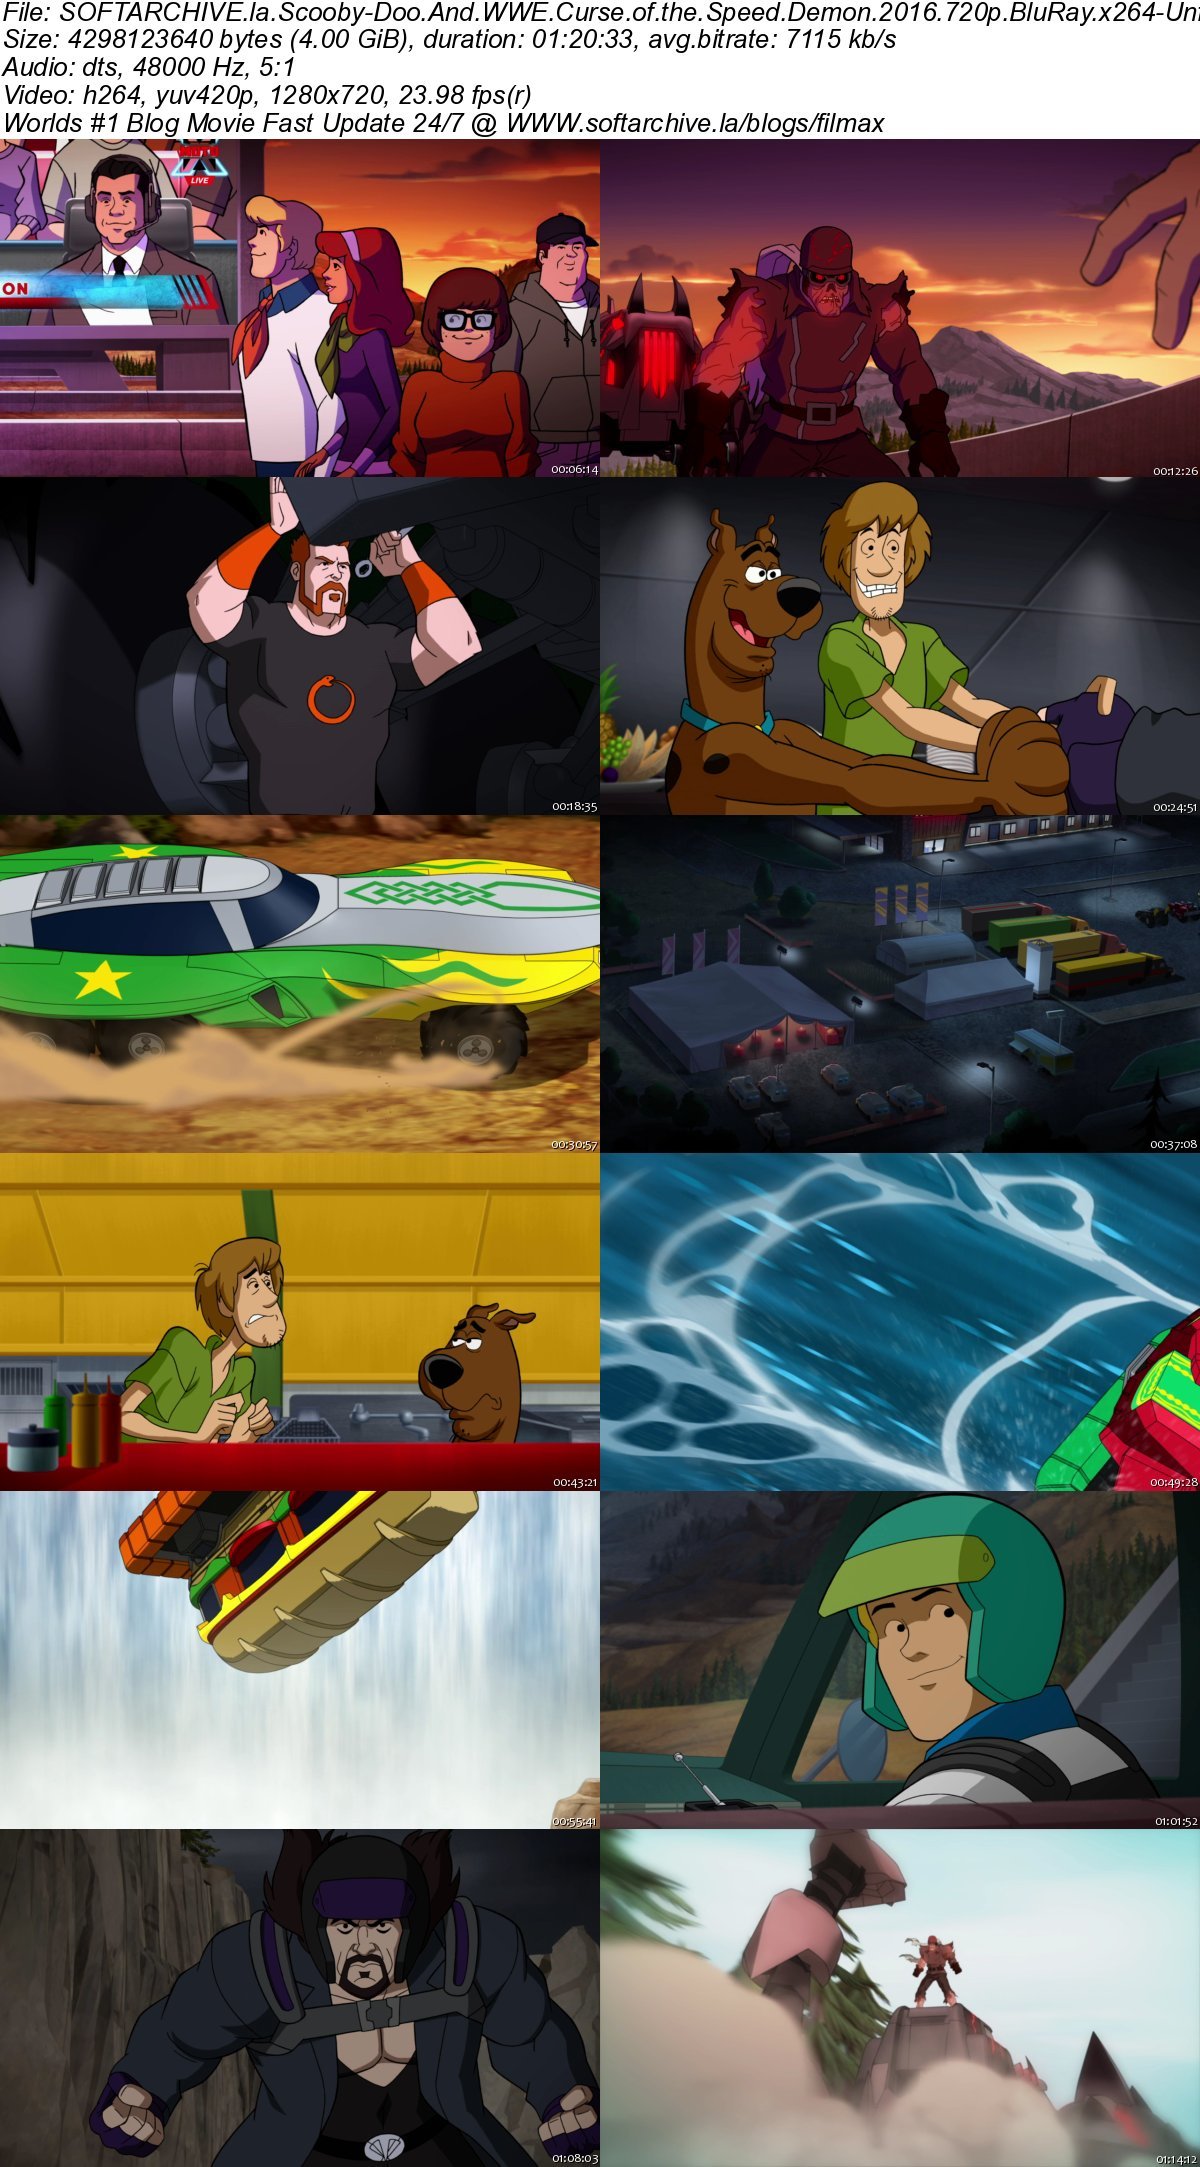 Scooby Doo And WWE Curse of the Speed Demon 2016 720p BluRay x264 ...